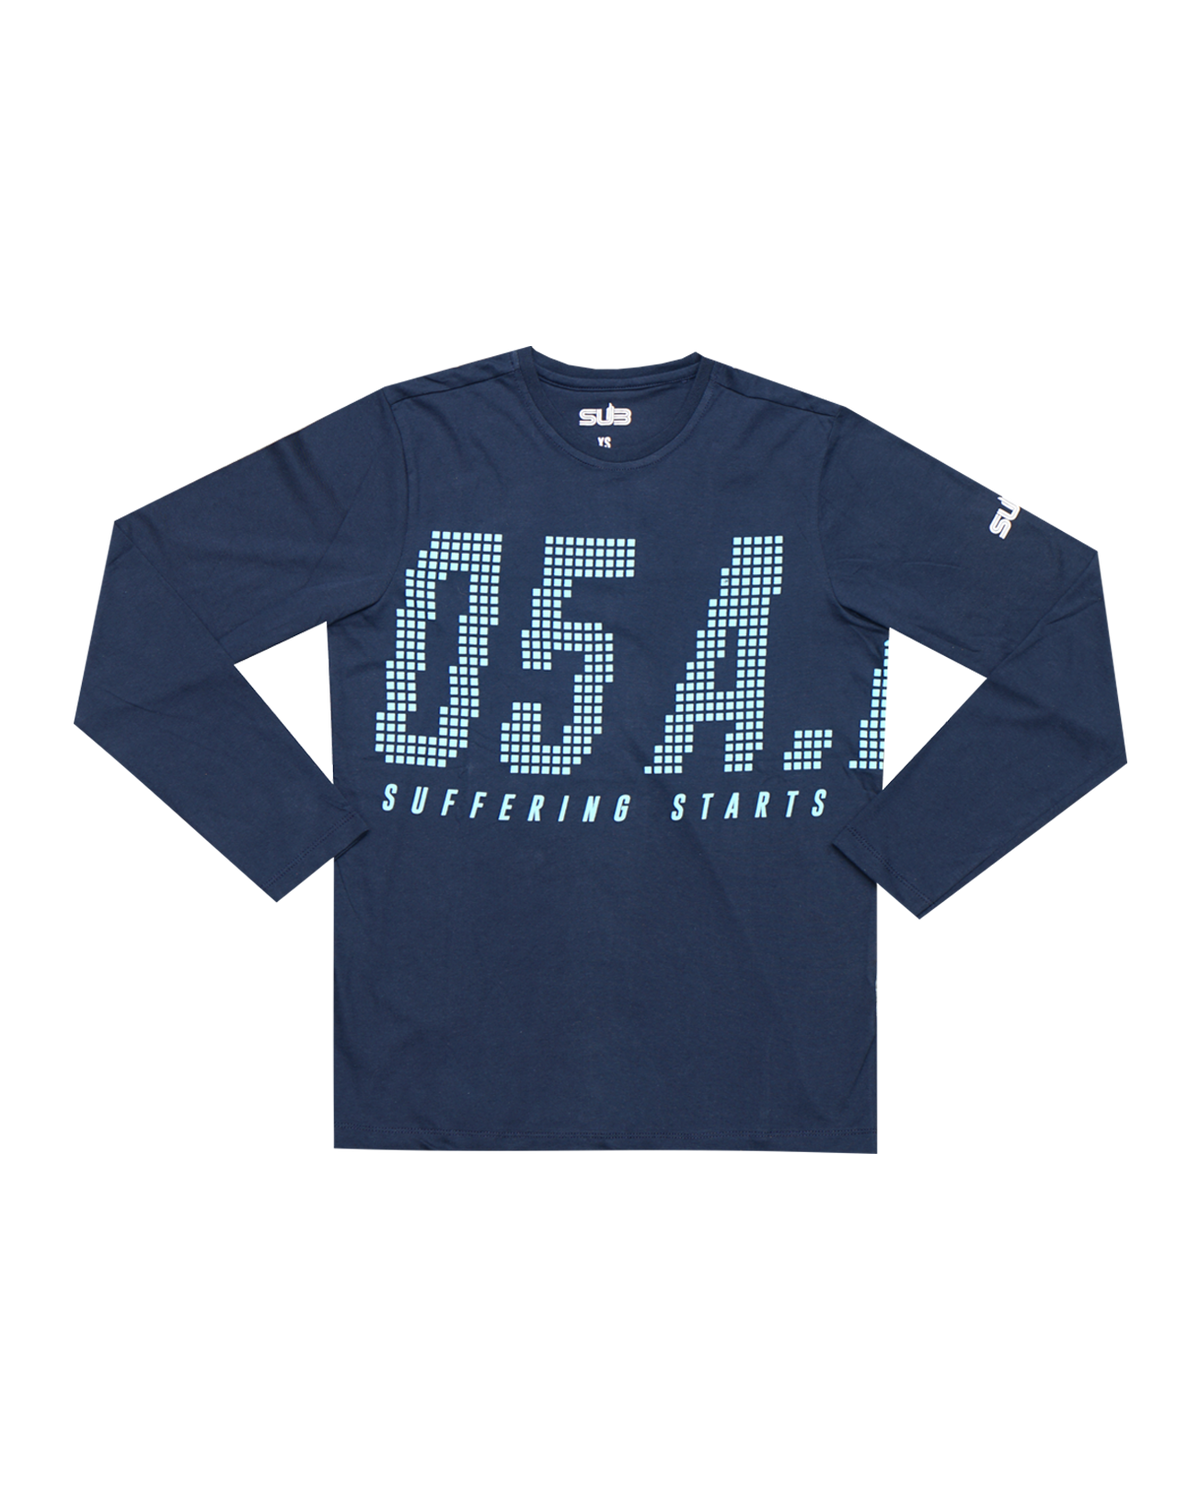 SUB Sweater Hoodie Olive + Free T-shirt 05AM Long Sleeves Navy Blue